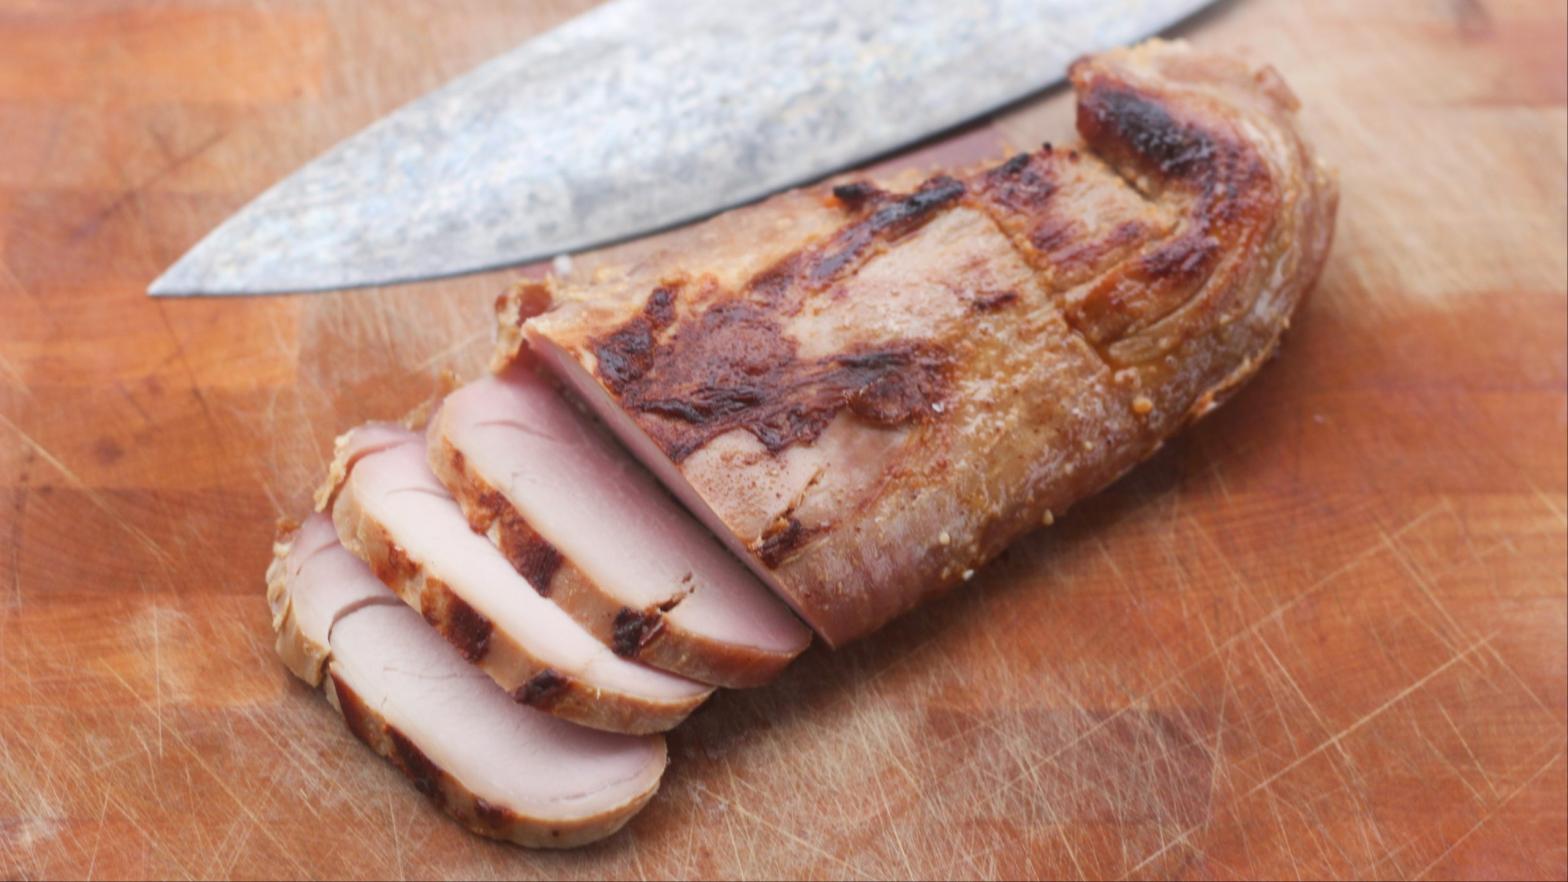 This is only half of a pork tenderloin. I ate the other half last night. (Photo: Claire Lower)